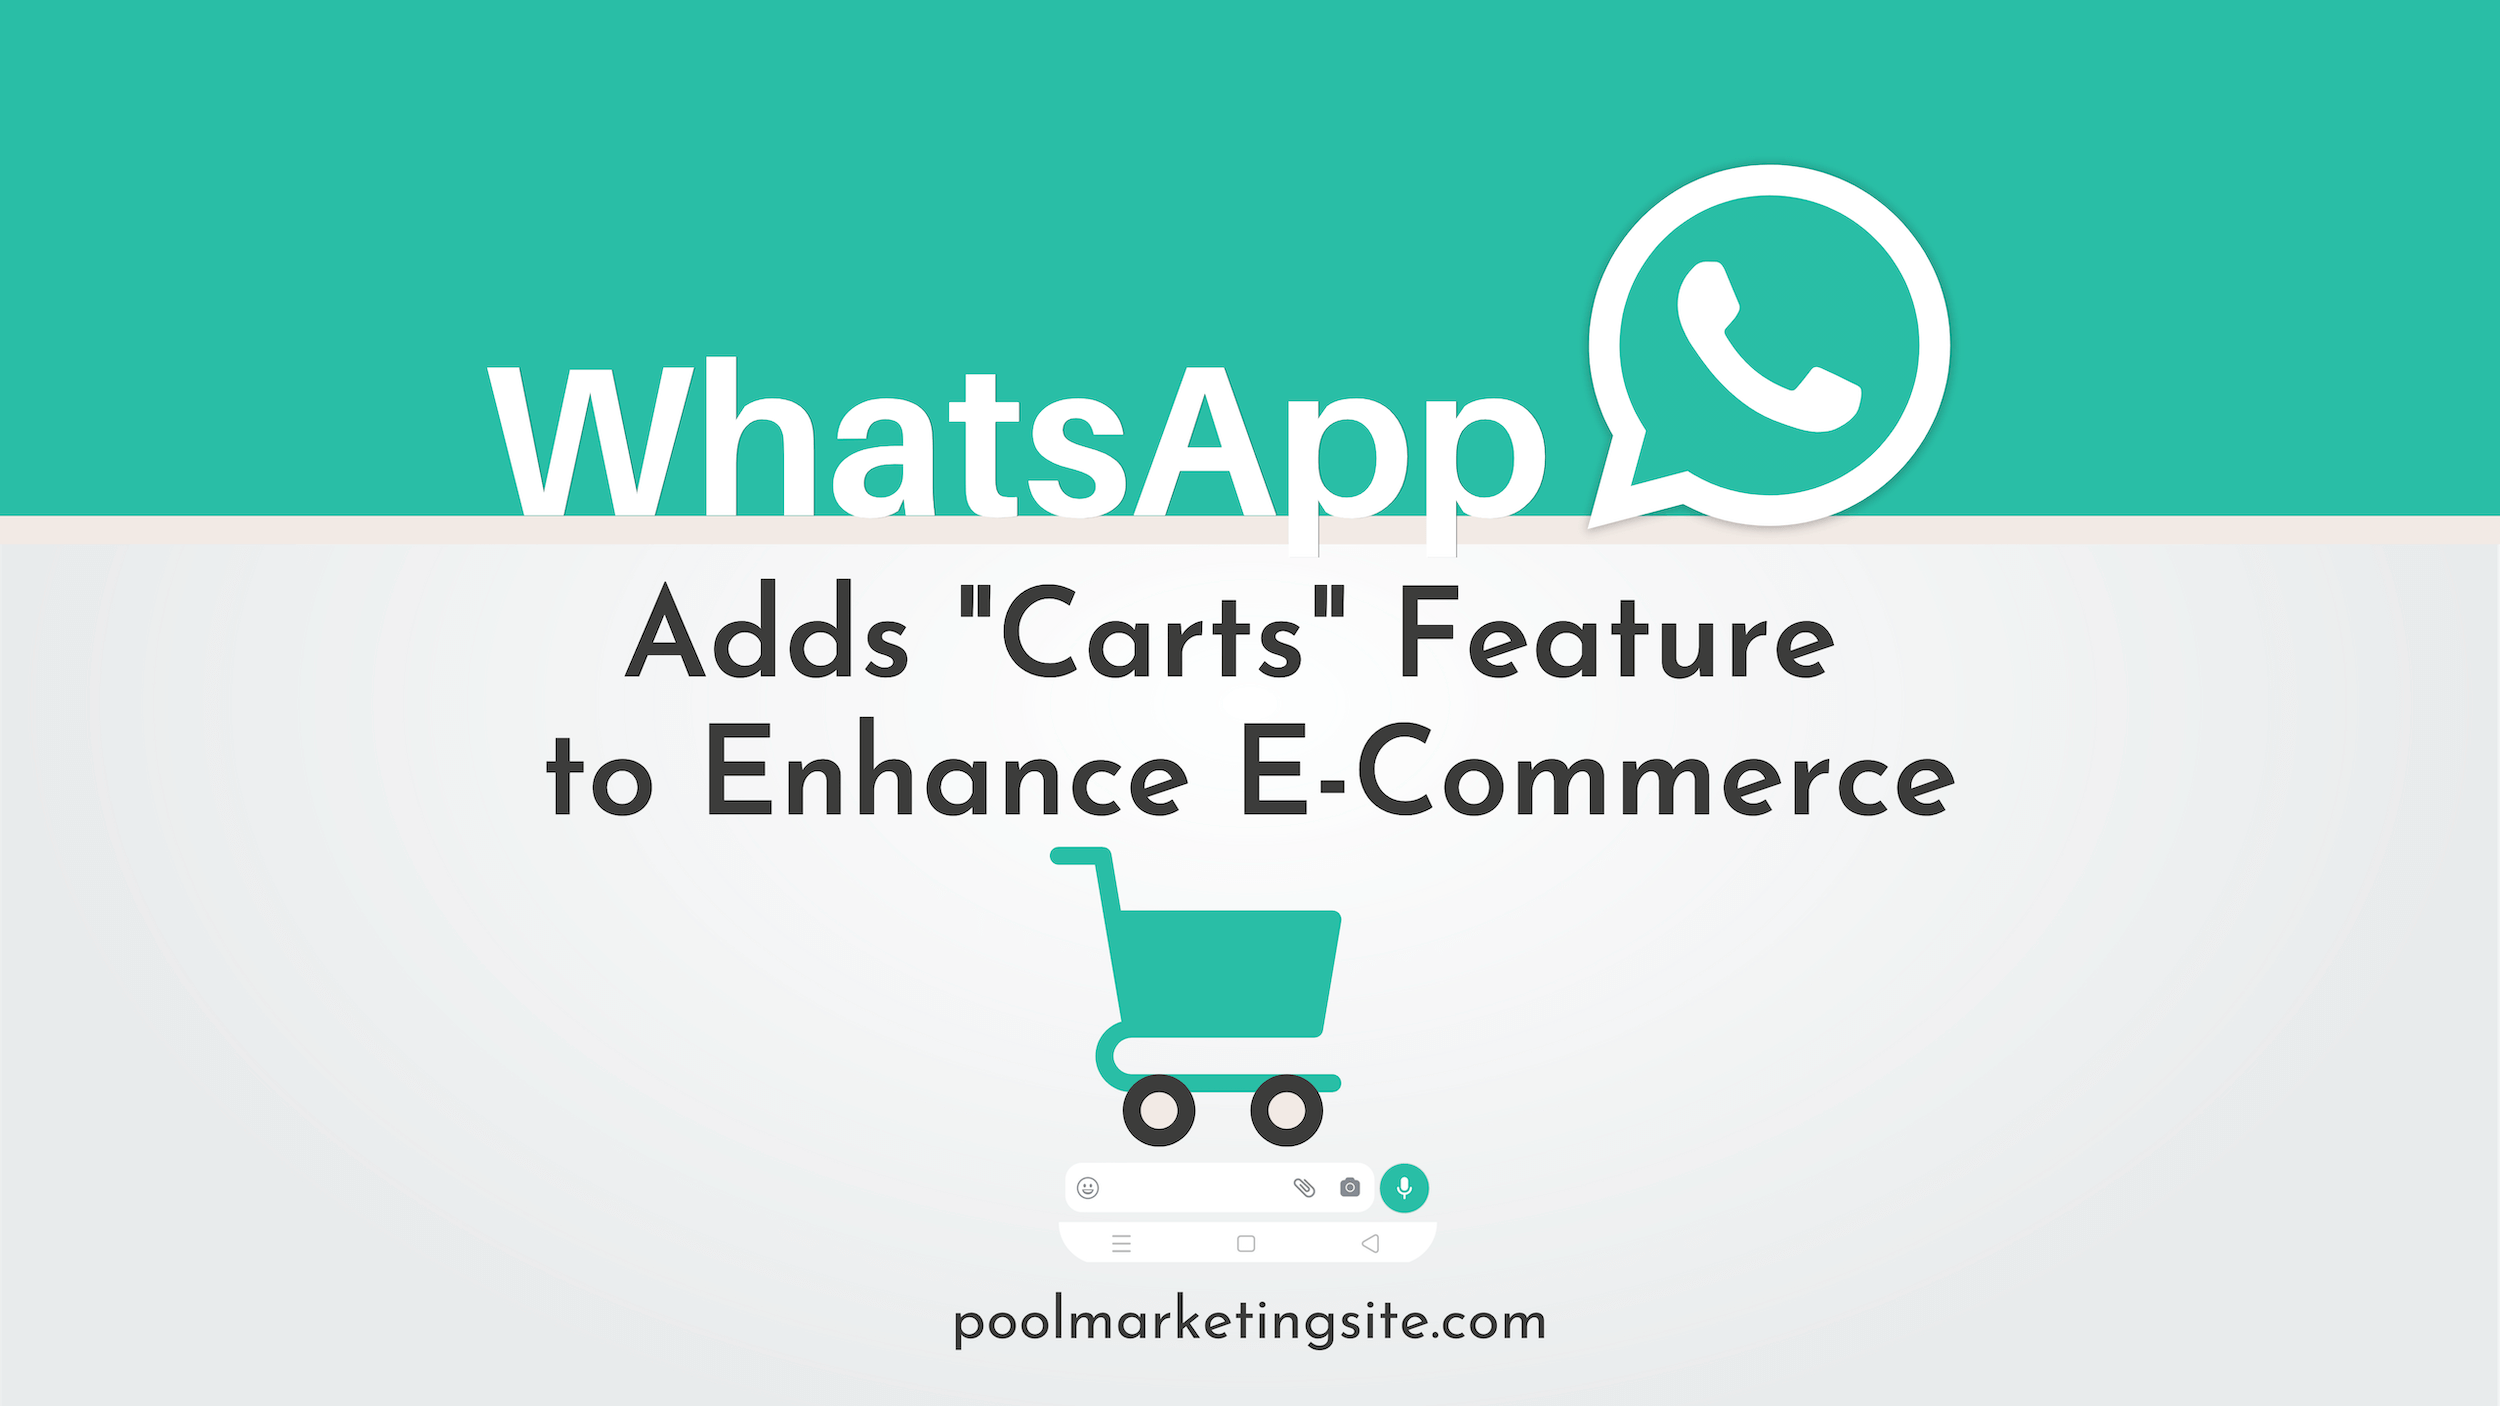 WhatsApp Adds ‘Carts’ Feature to Enhance E-Commerce